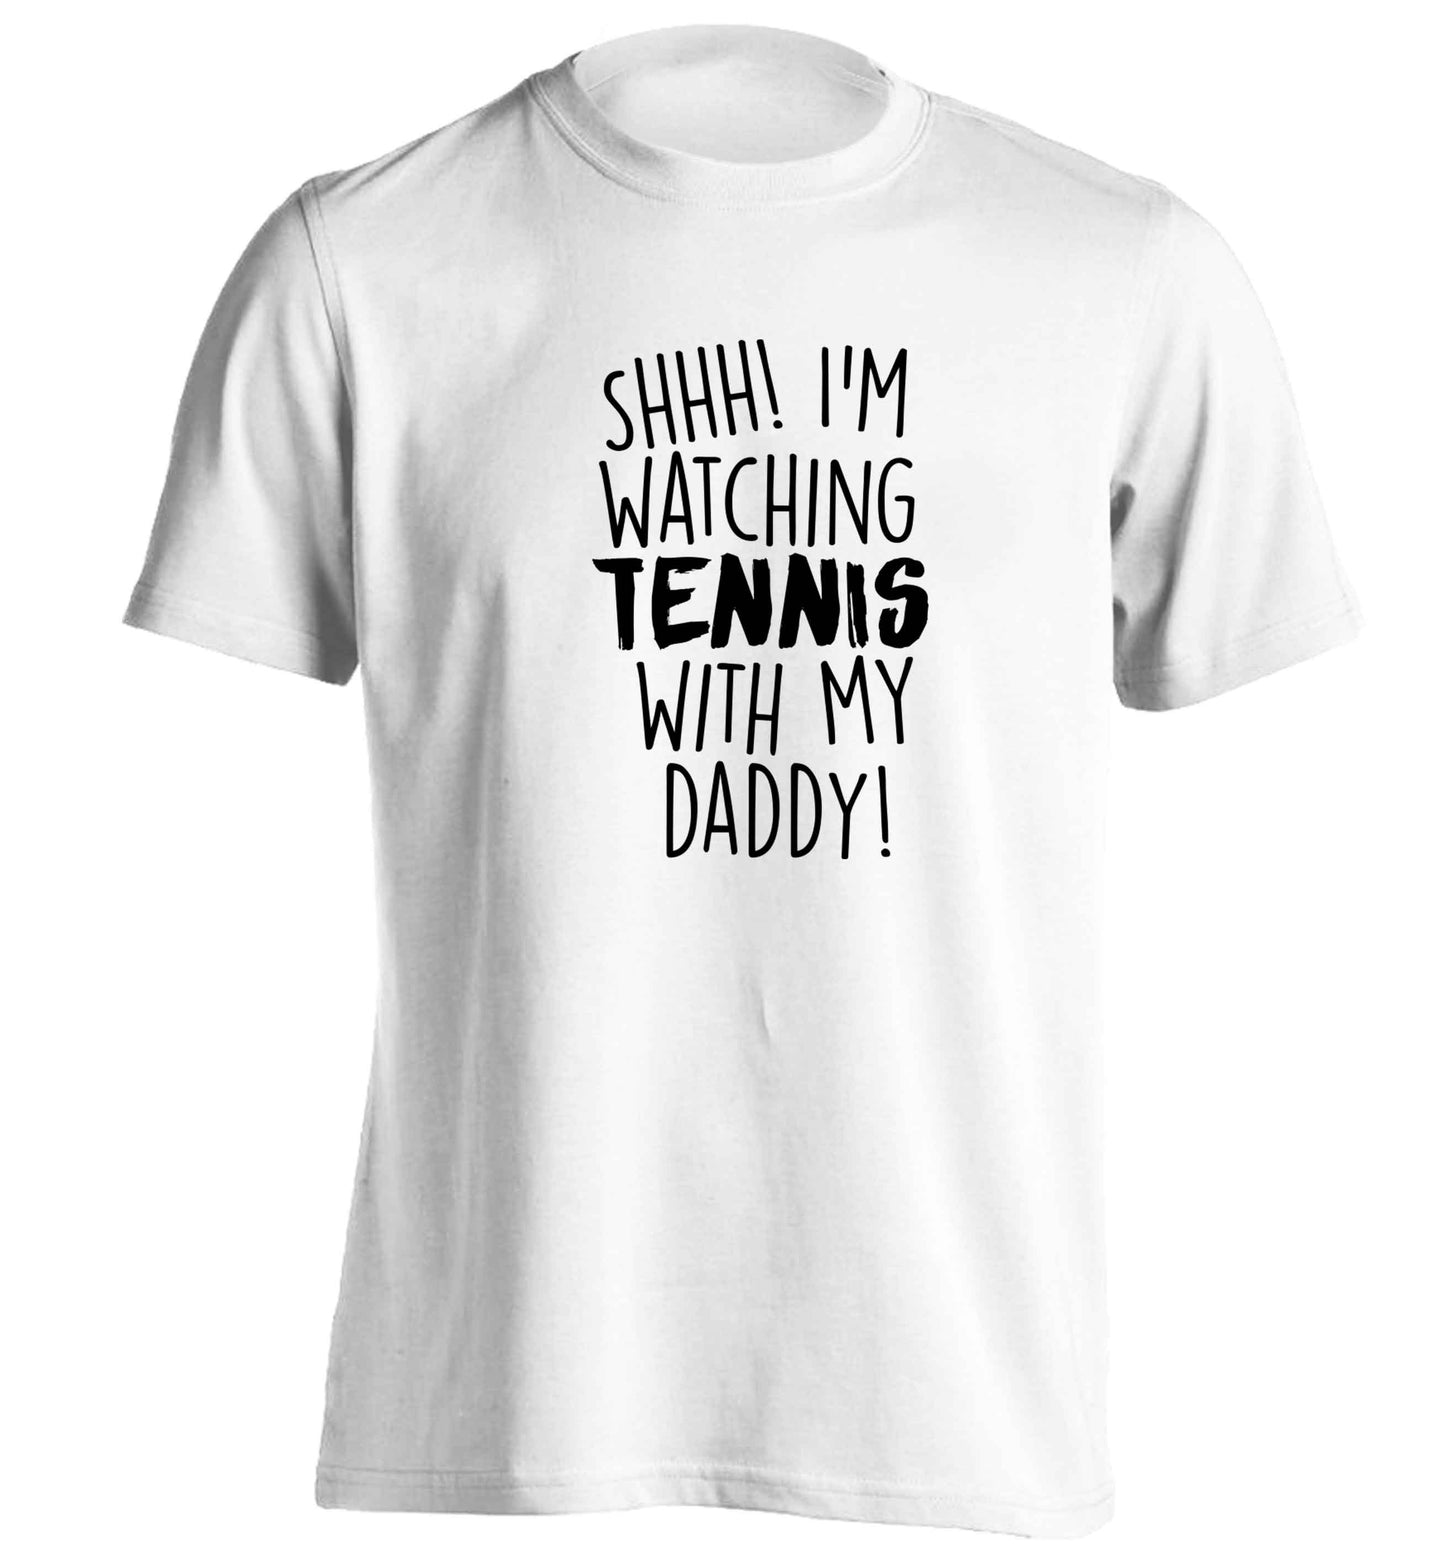 Shh! I'm watching tennis with my daddy! adults unisex white Tshirt 2XL